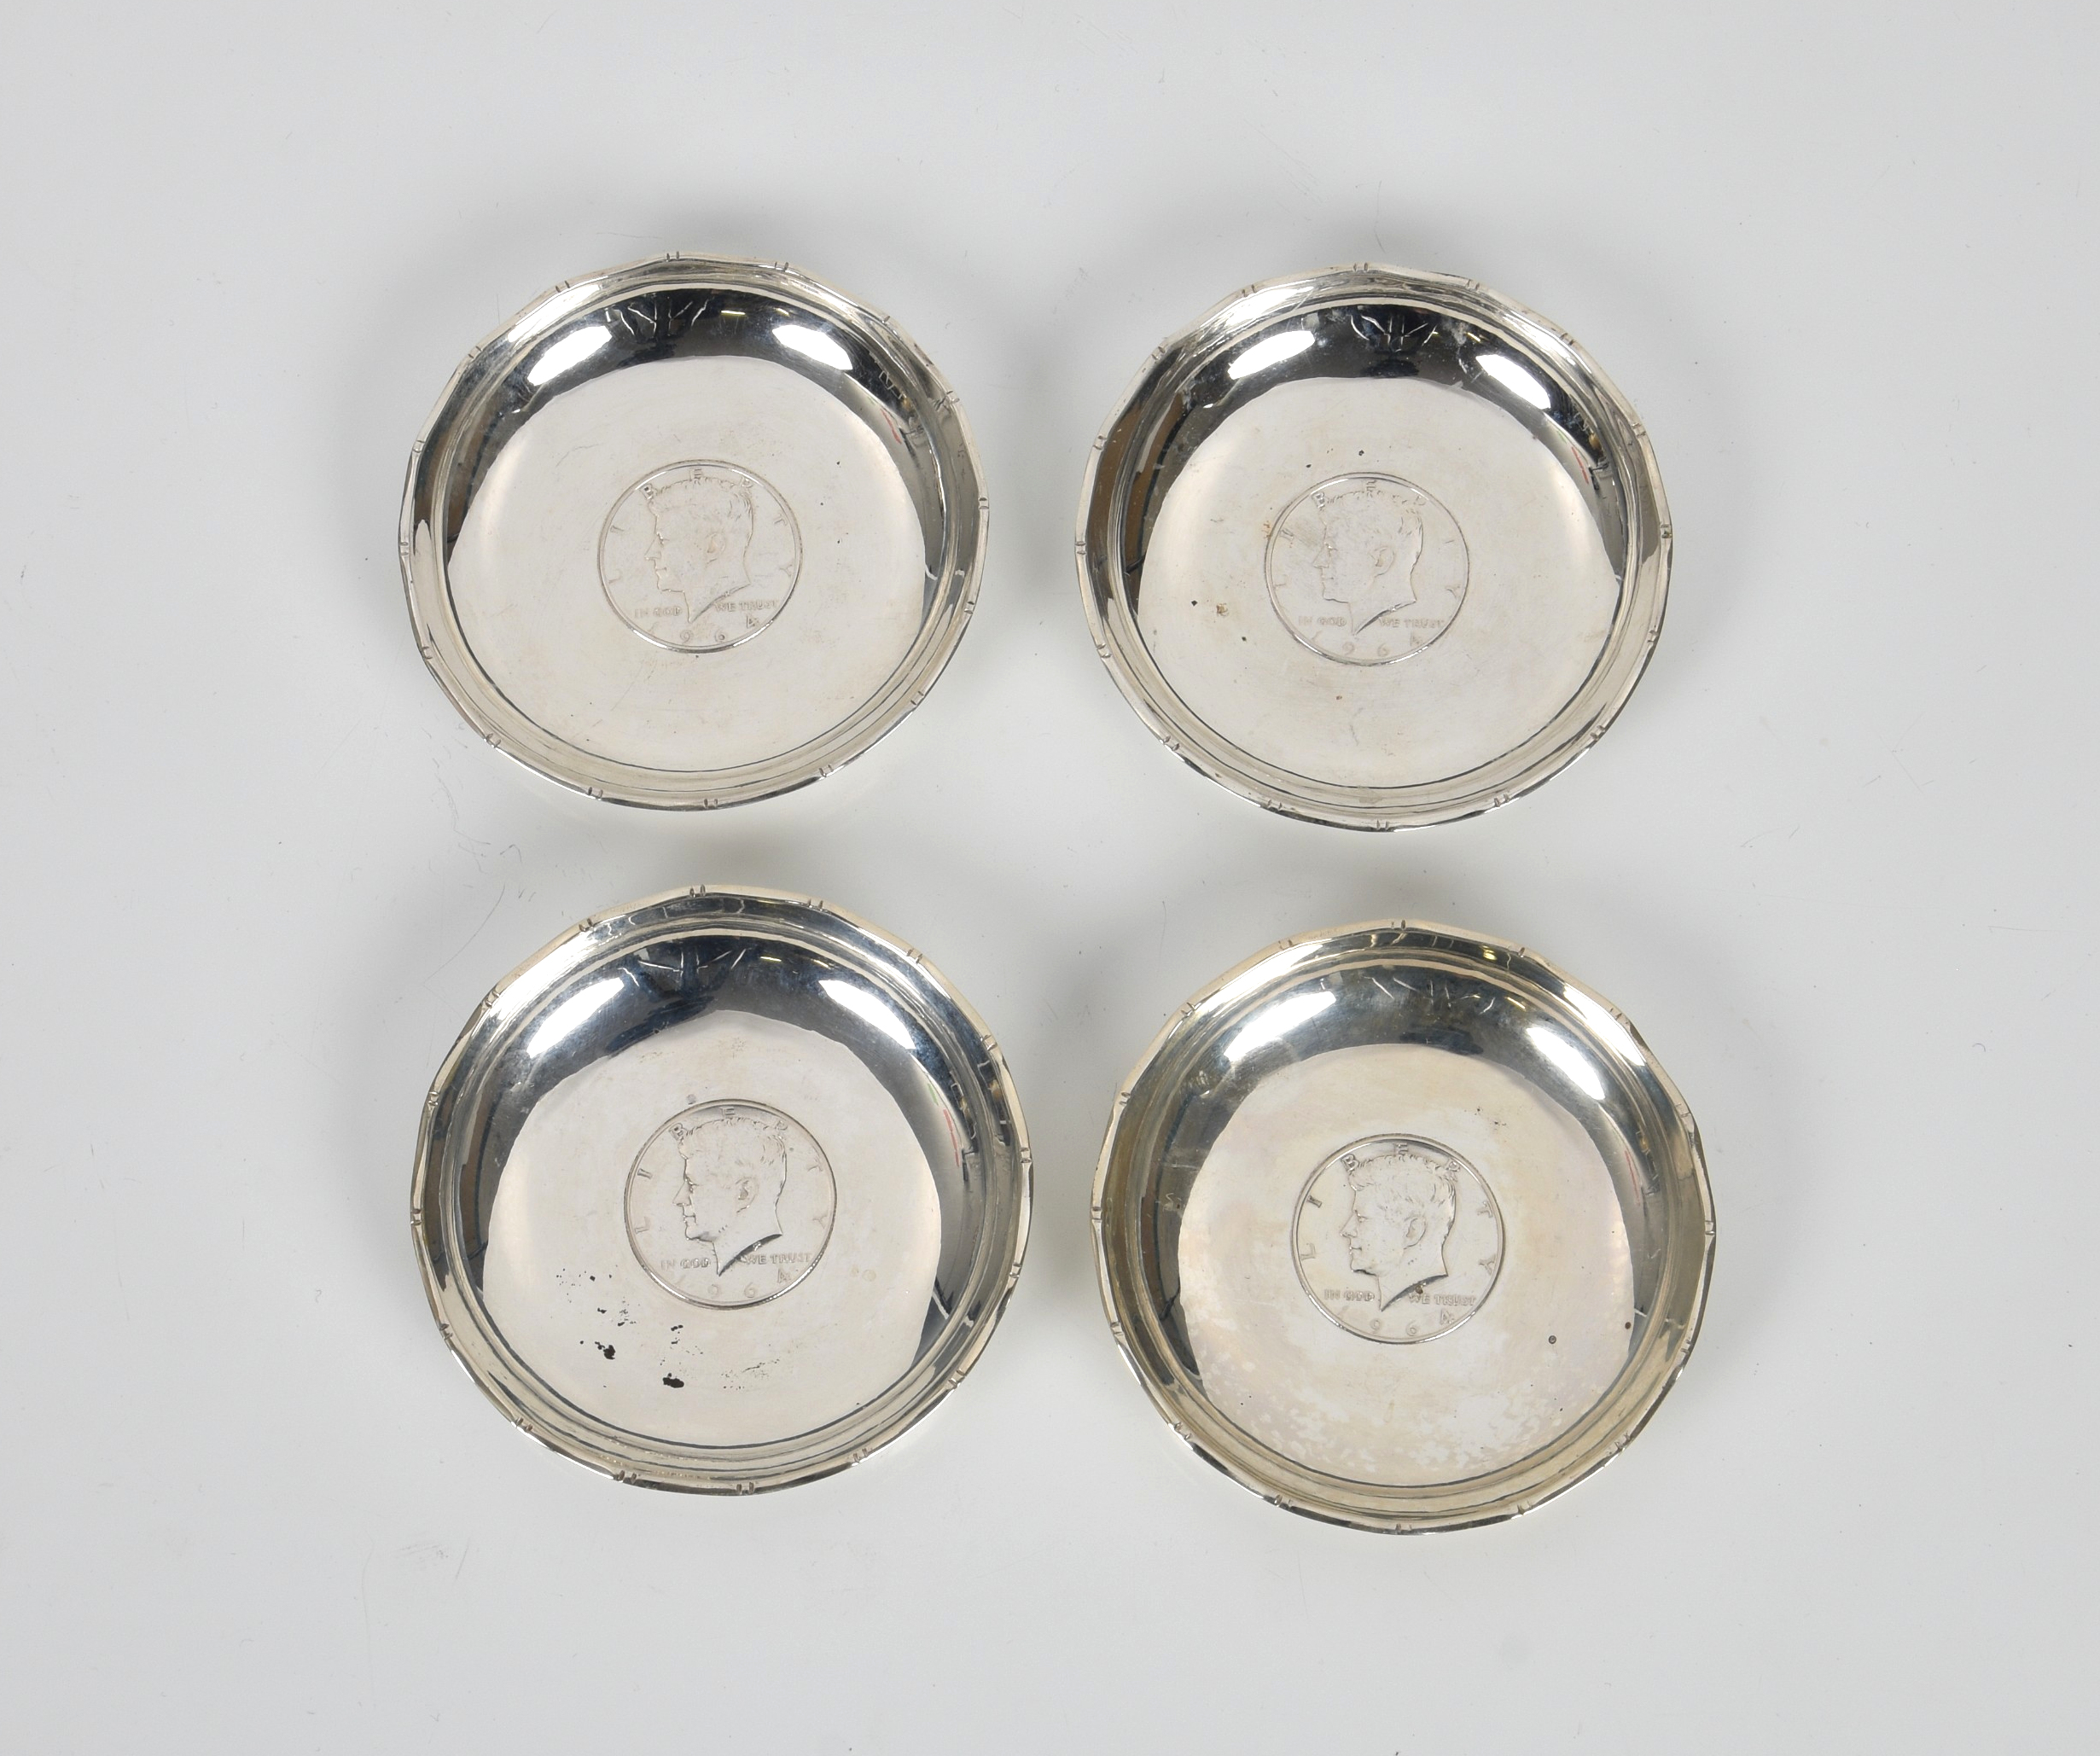 A set of four Hong Kong silver pin dishes by Wai Kee, with inset HK junk dollar coins, 3½in. (8.